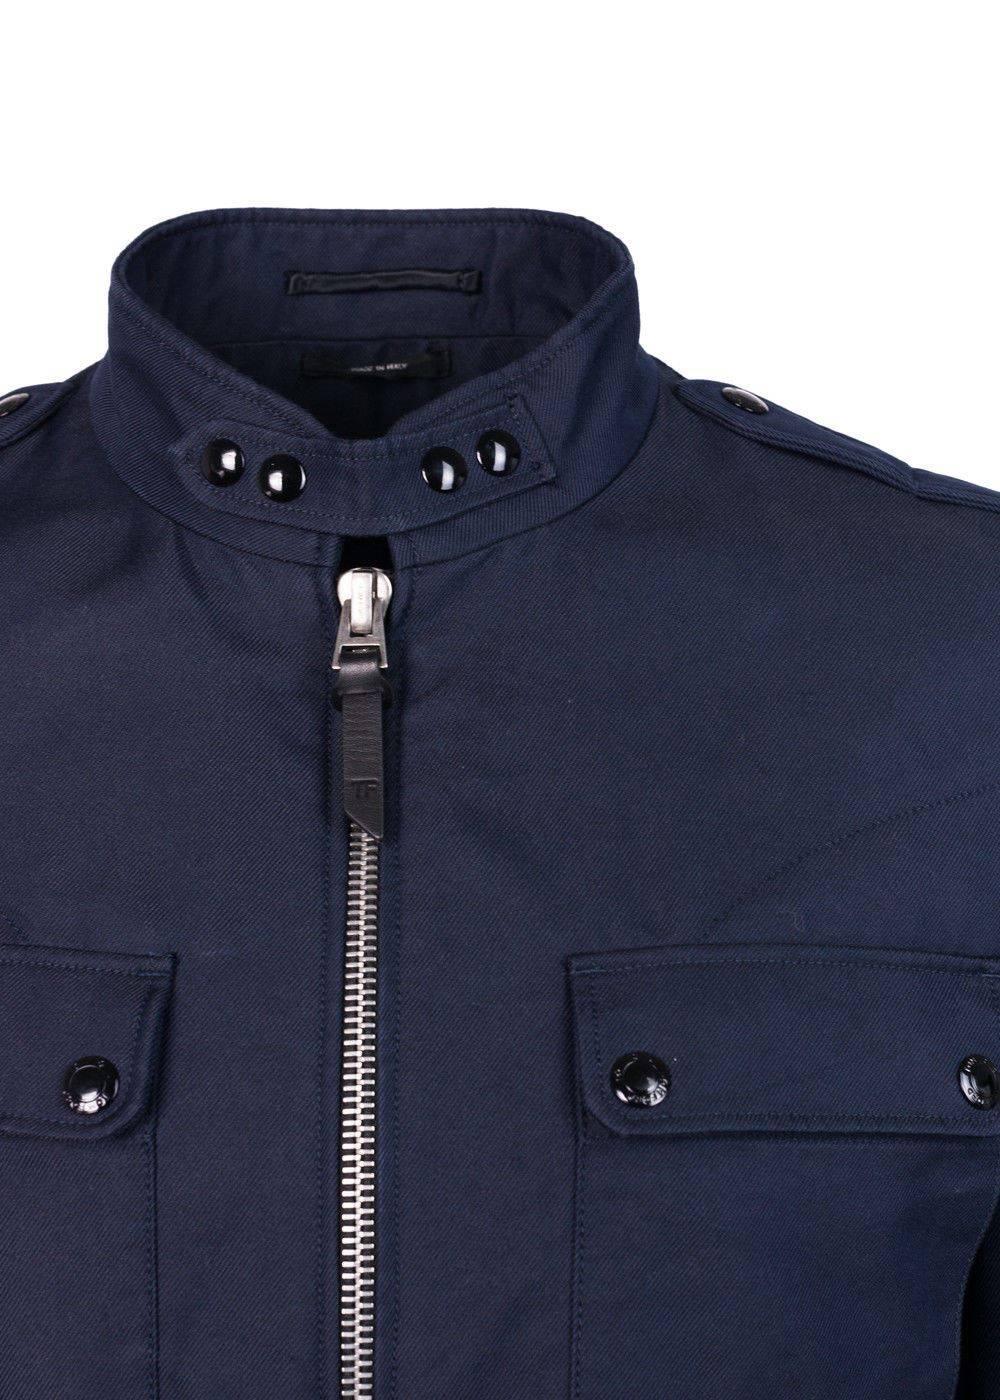 Brand New Tom Ford Utilitarian Sport Jacket
Original Tags & Hanger Included
Retails in Stores & Online for $3250
Men's Size EUR 50 / US 40 Fits True to Size

Tom Ford's Blue Sports Jacket is undoubtedly this season's essential. This richly saturated